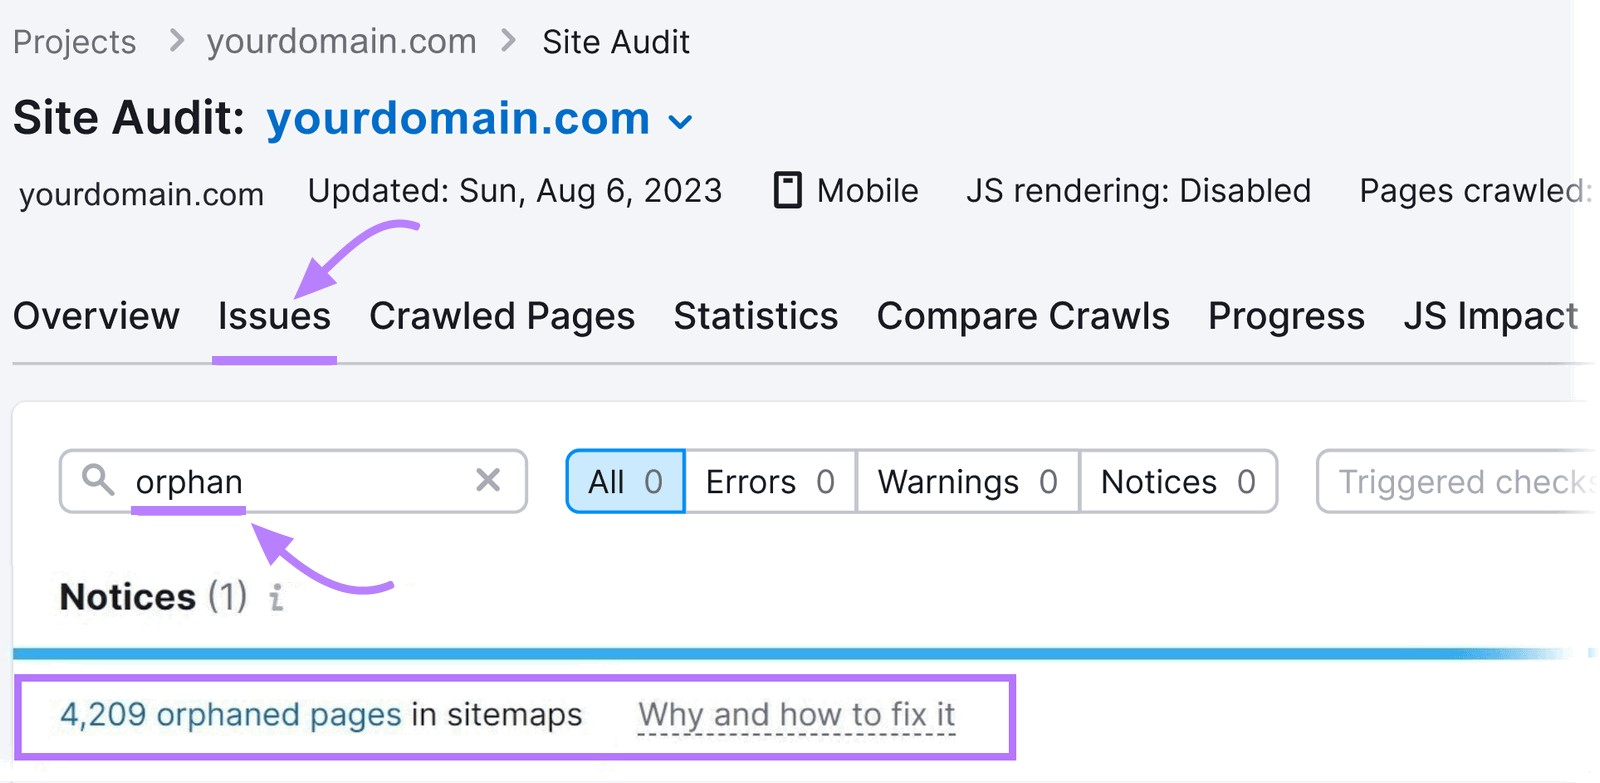 search for “orphan” in Site Audit "Issues" tab